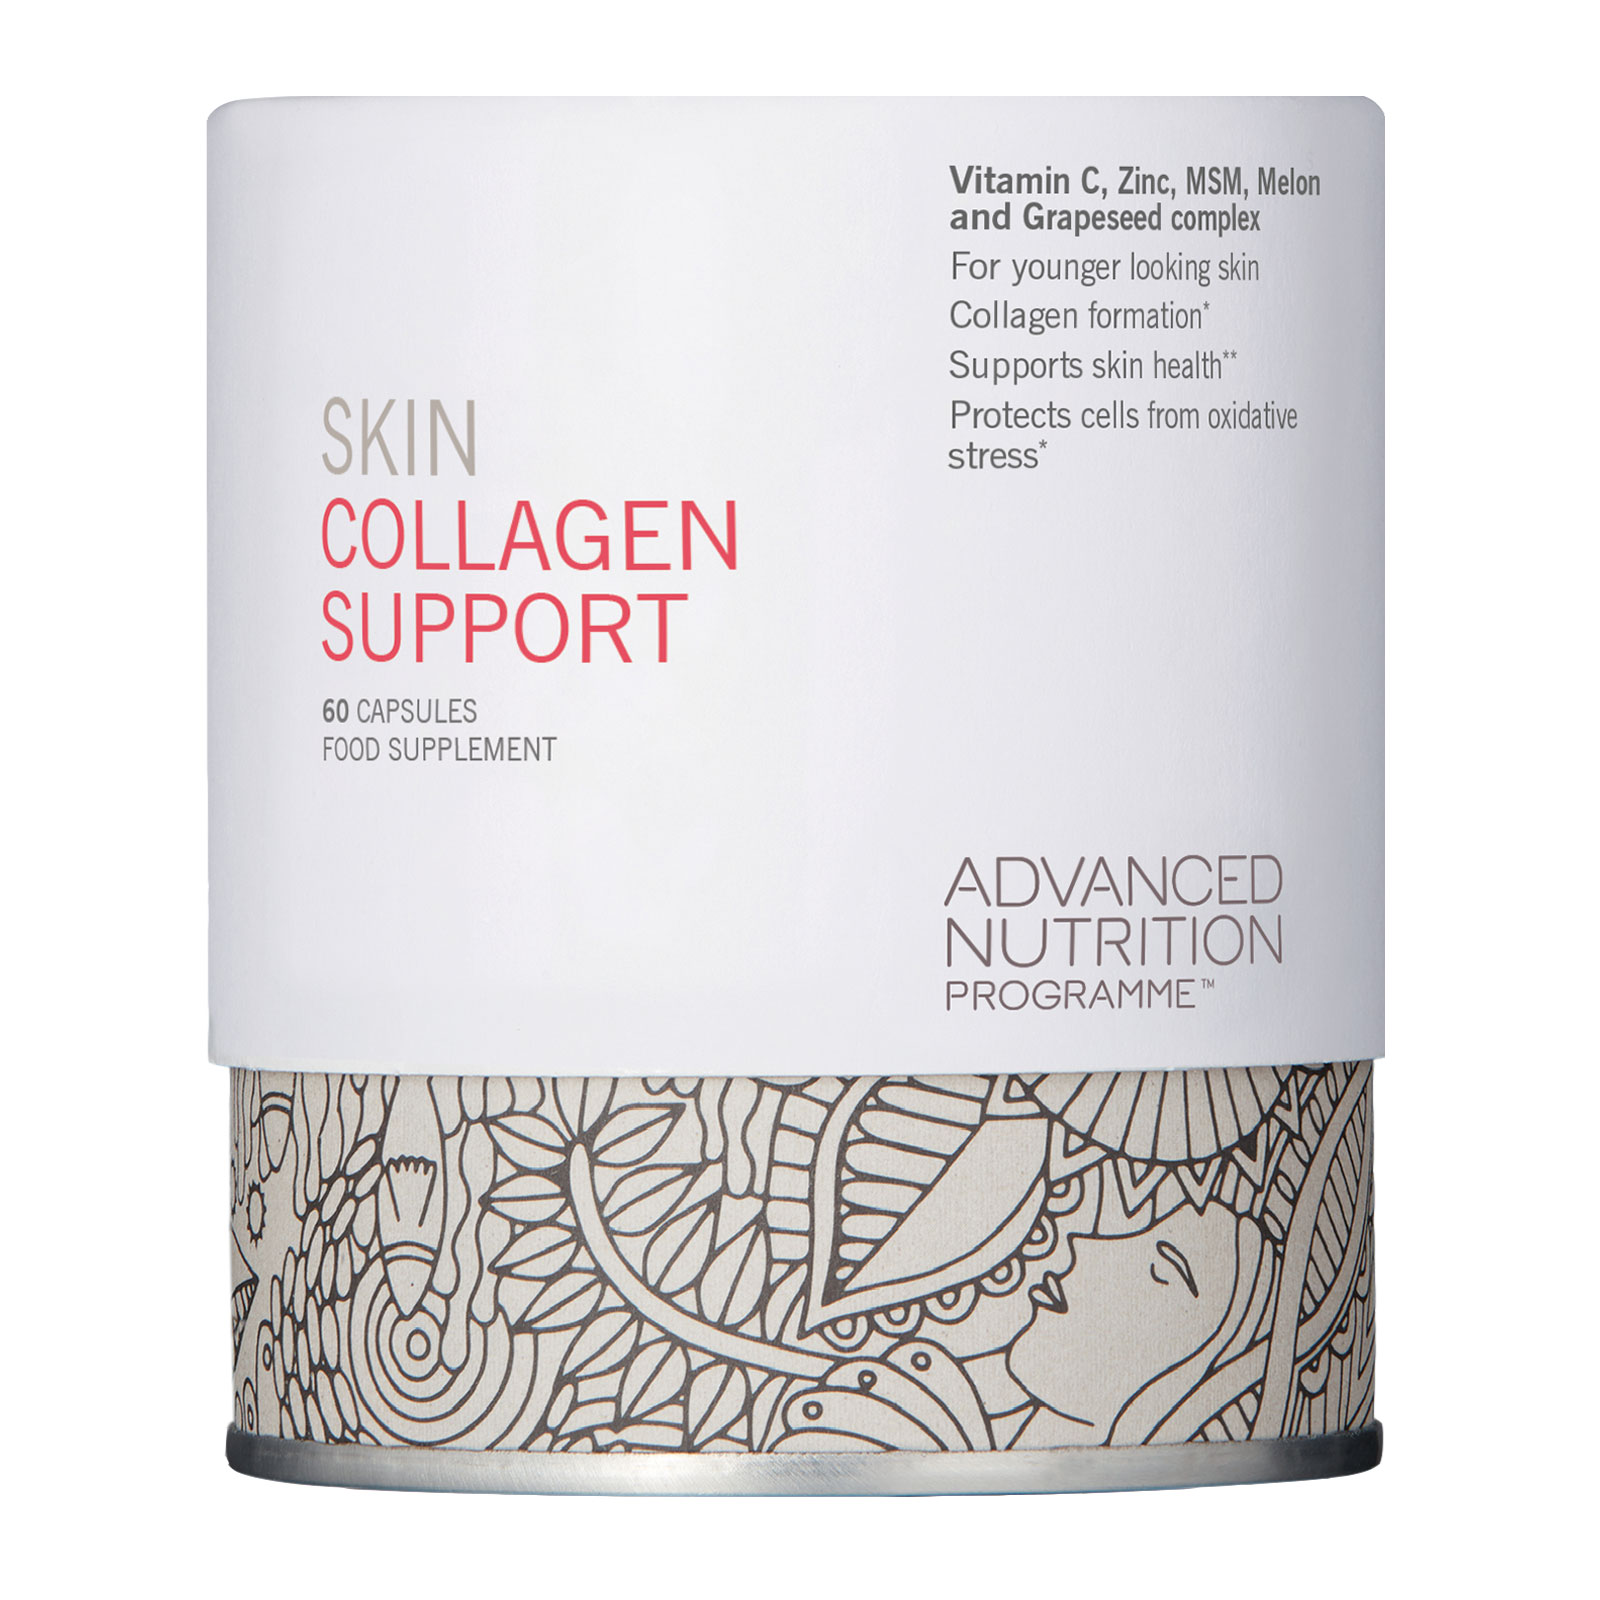 Advanced Nutrition Programme Skin Collagen Support X 60 Capsules